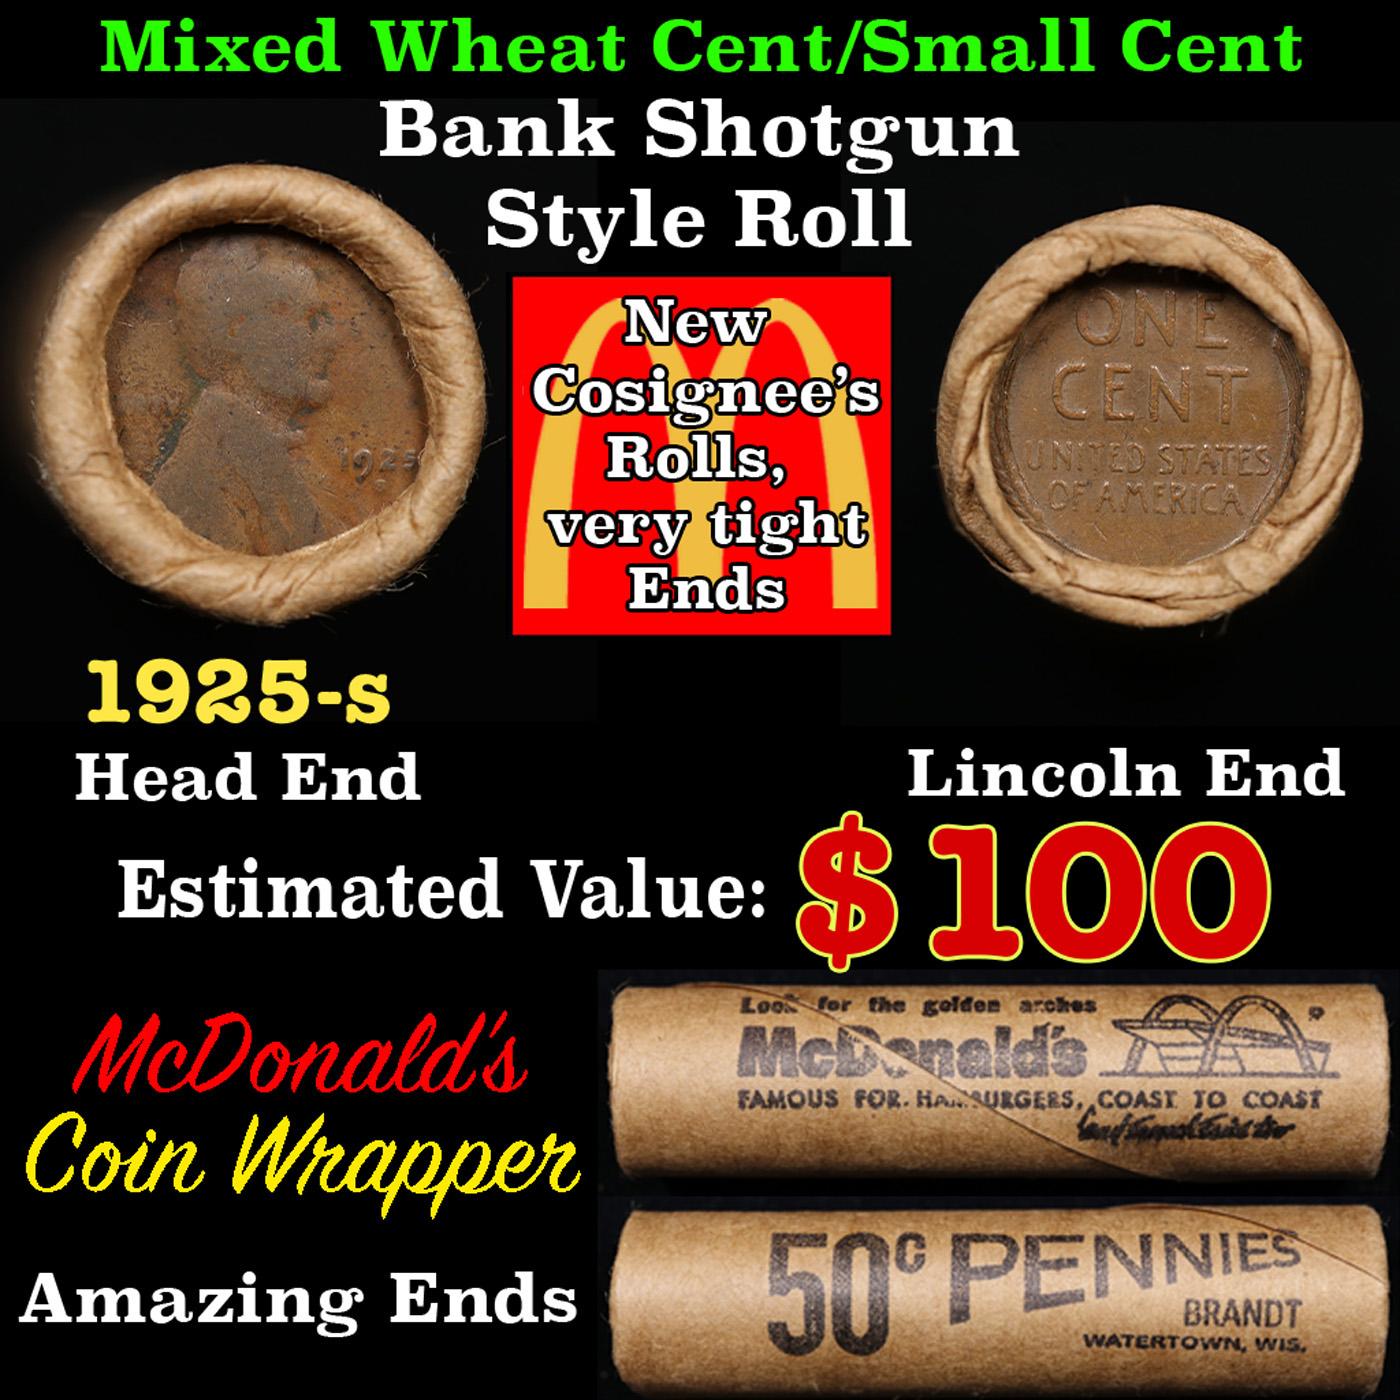 Lincoln Wheat Cent 1c Mixed Roll Orig Brandt McDonalds Wrapper, 1925-s end, Wheat other end